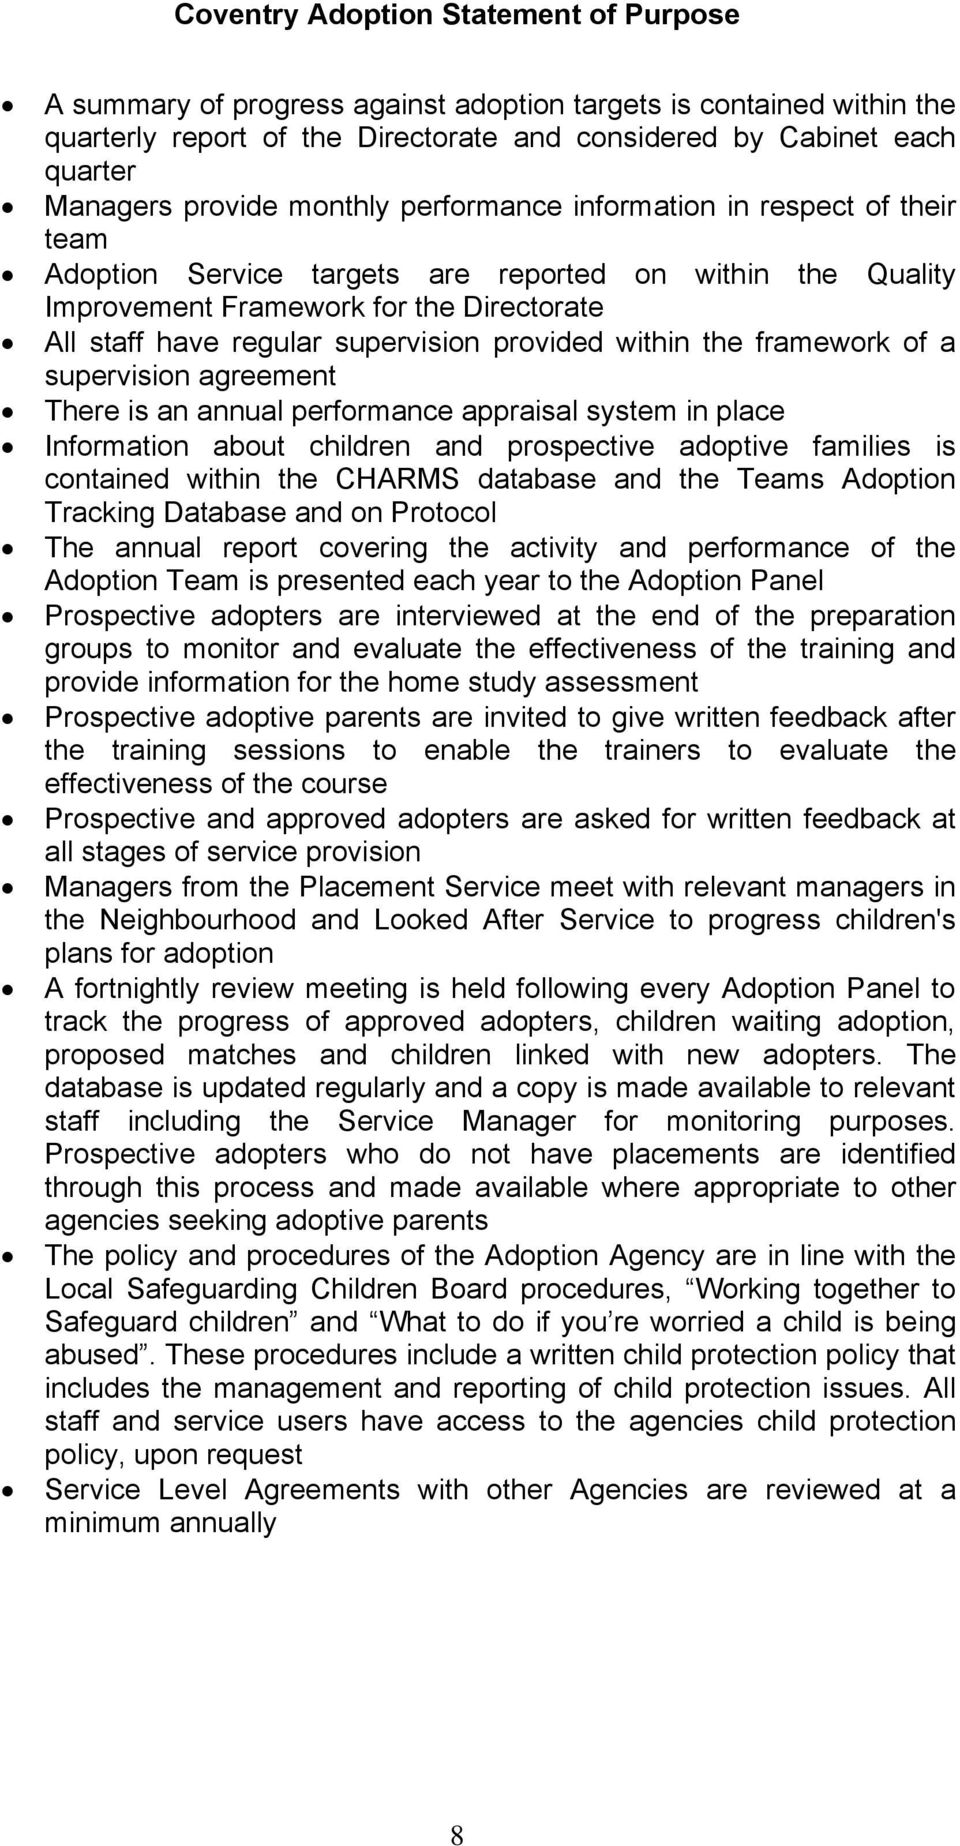 supervision agreement There is an annual performance appraisal system in place Information about children and prospective adoptive families is contained within the CHARMS database and the Teams